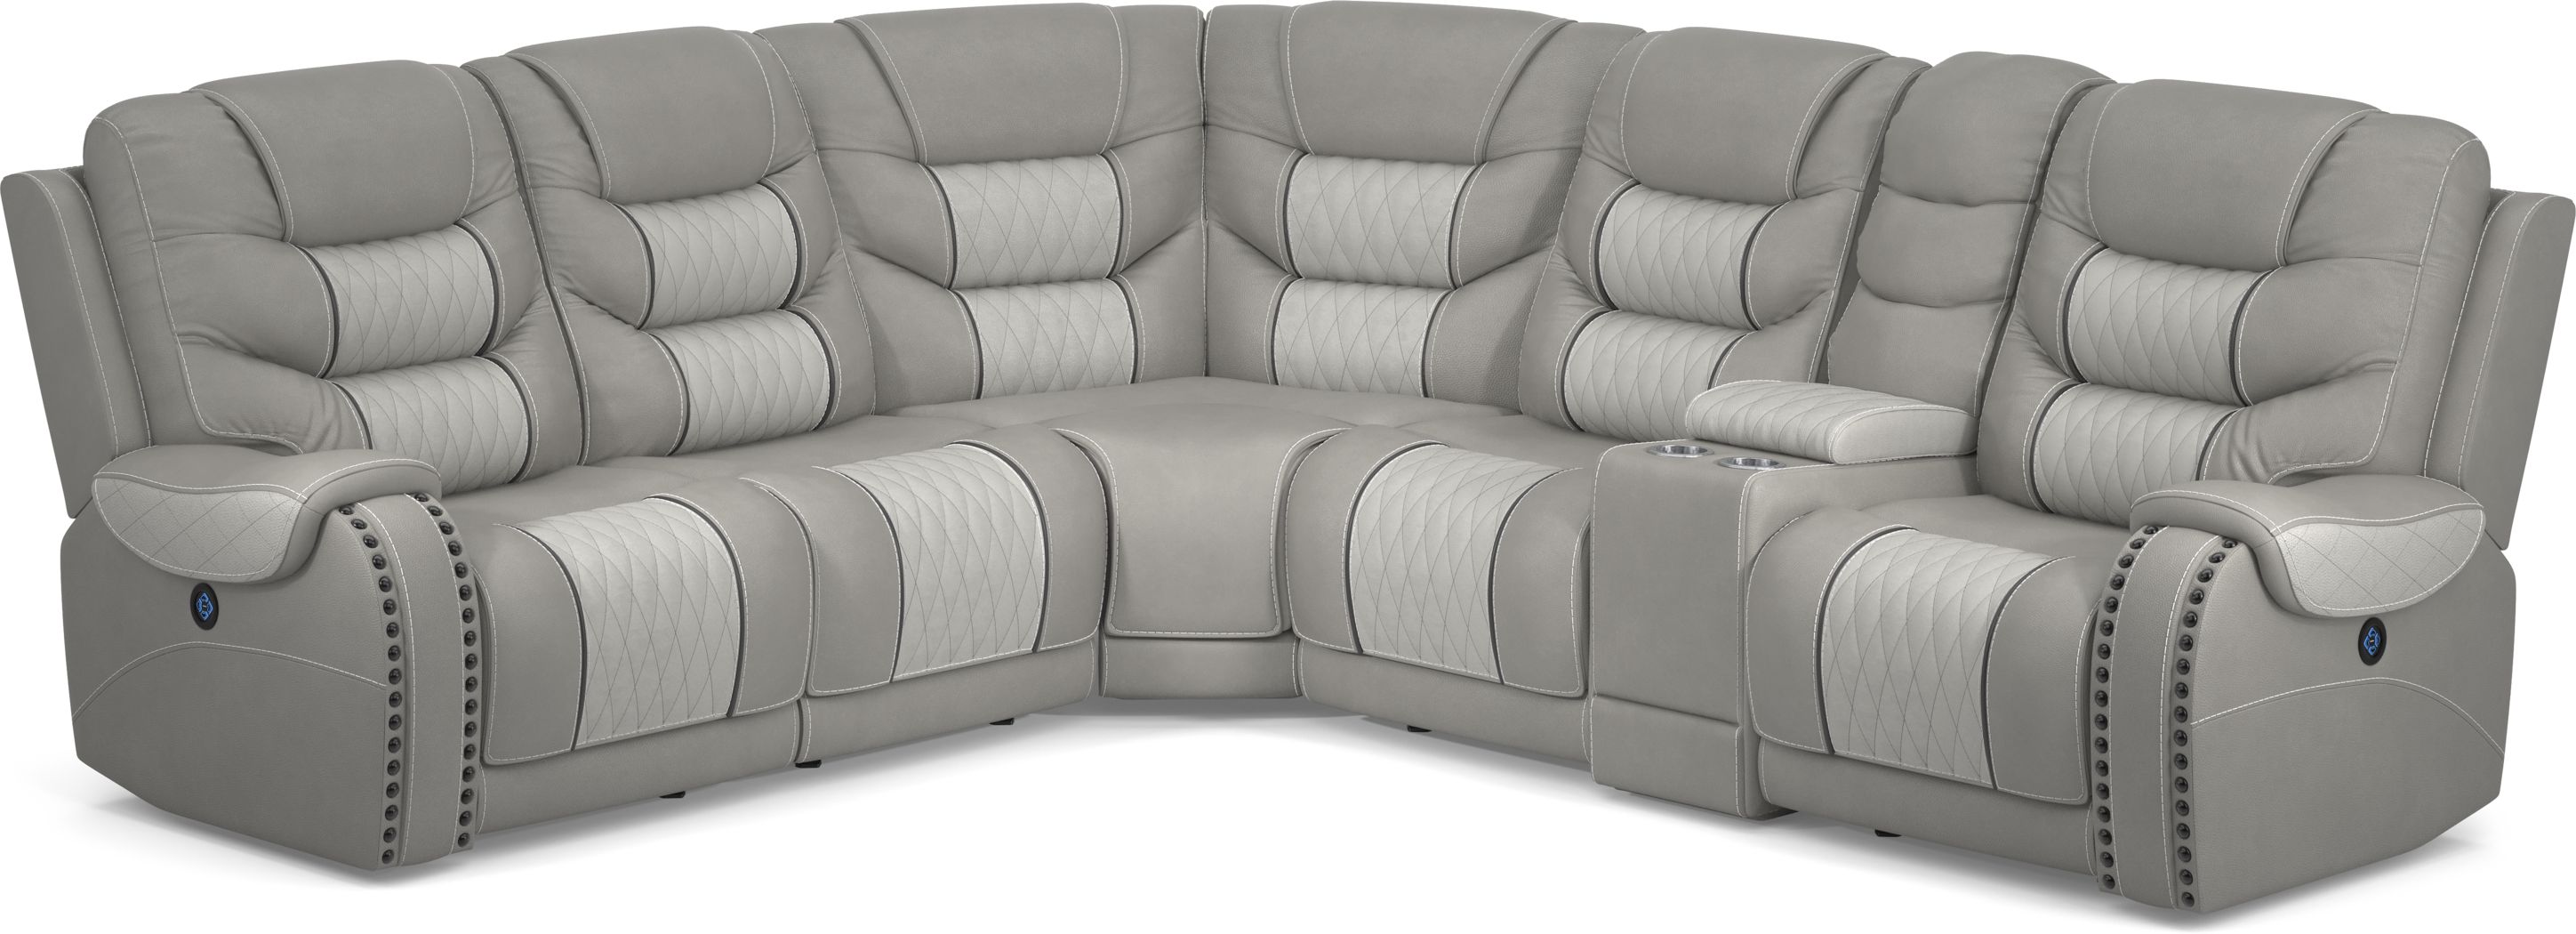 Eric Church Highway To Home Headliner Gray Leather 6 Pc Dual Power Reclining Sectional 1368936P Image Item?cache Id=03b6f93ea09391d0b6e401091cf4ff85